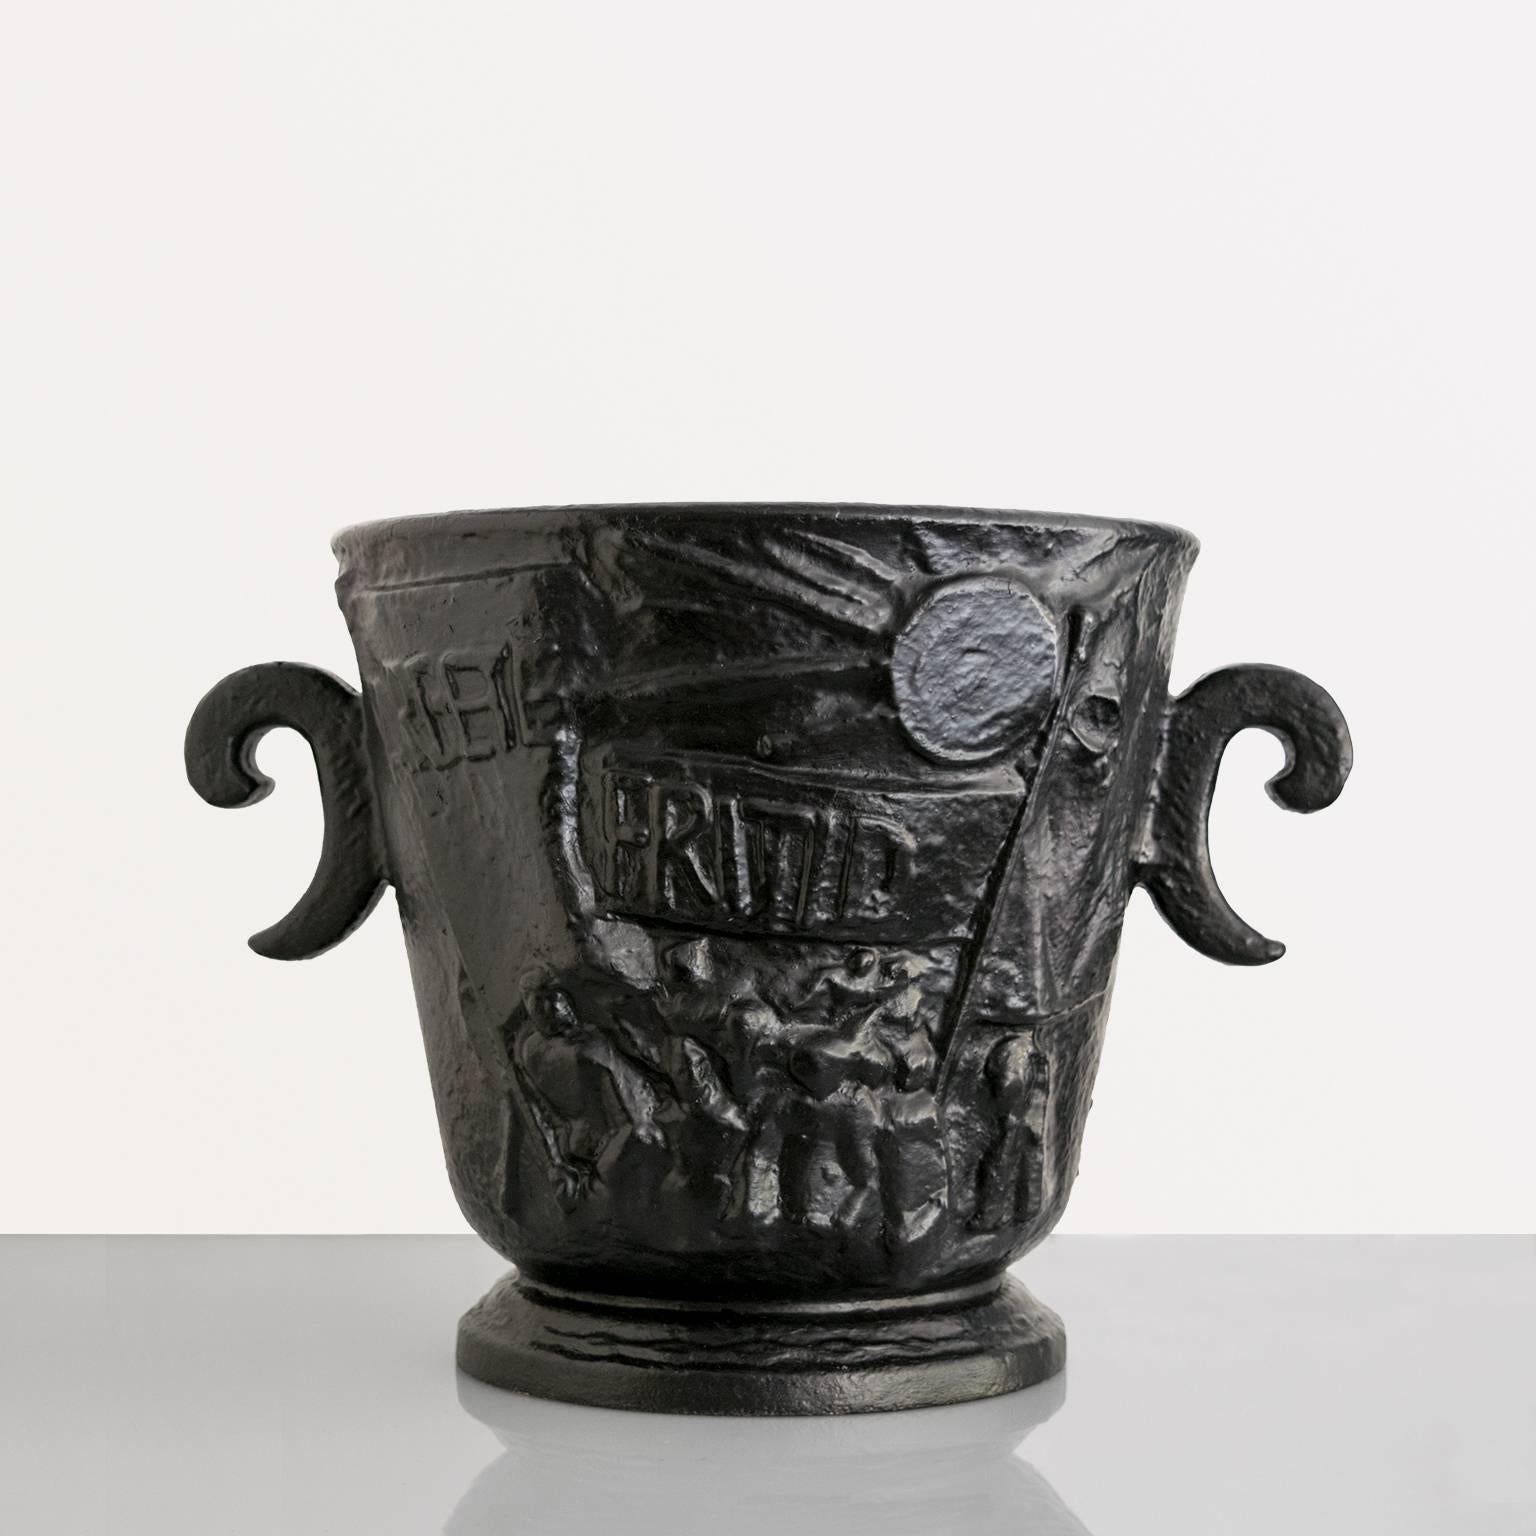 A large Scandinavian Modern cast iron "Leisure Urn" depicting cultural arts on one side and the demand for social change during the 1930s. One side has marching workers carrying banners which read "Arbete Fritid" the other side